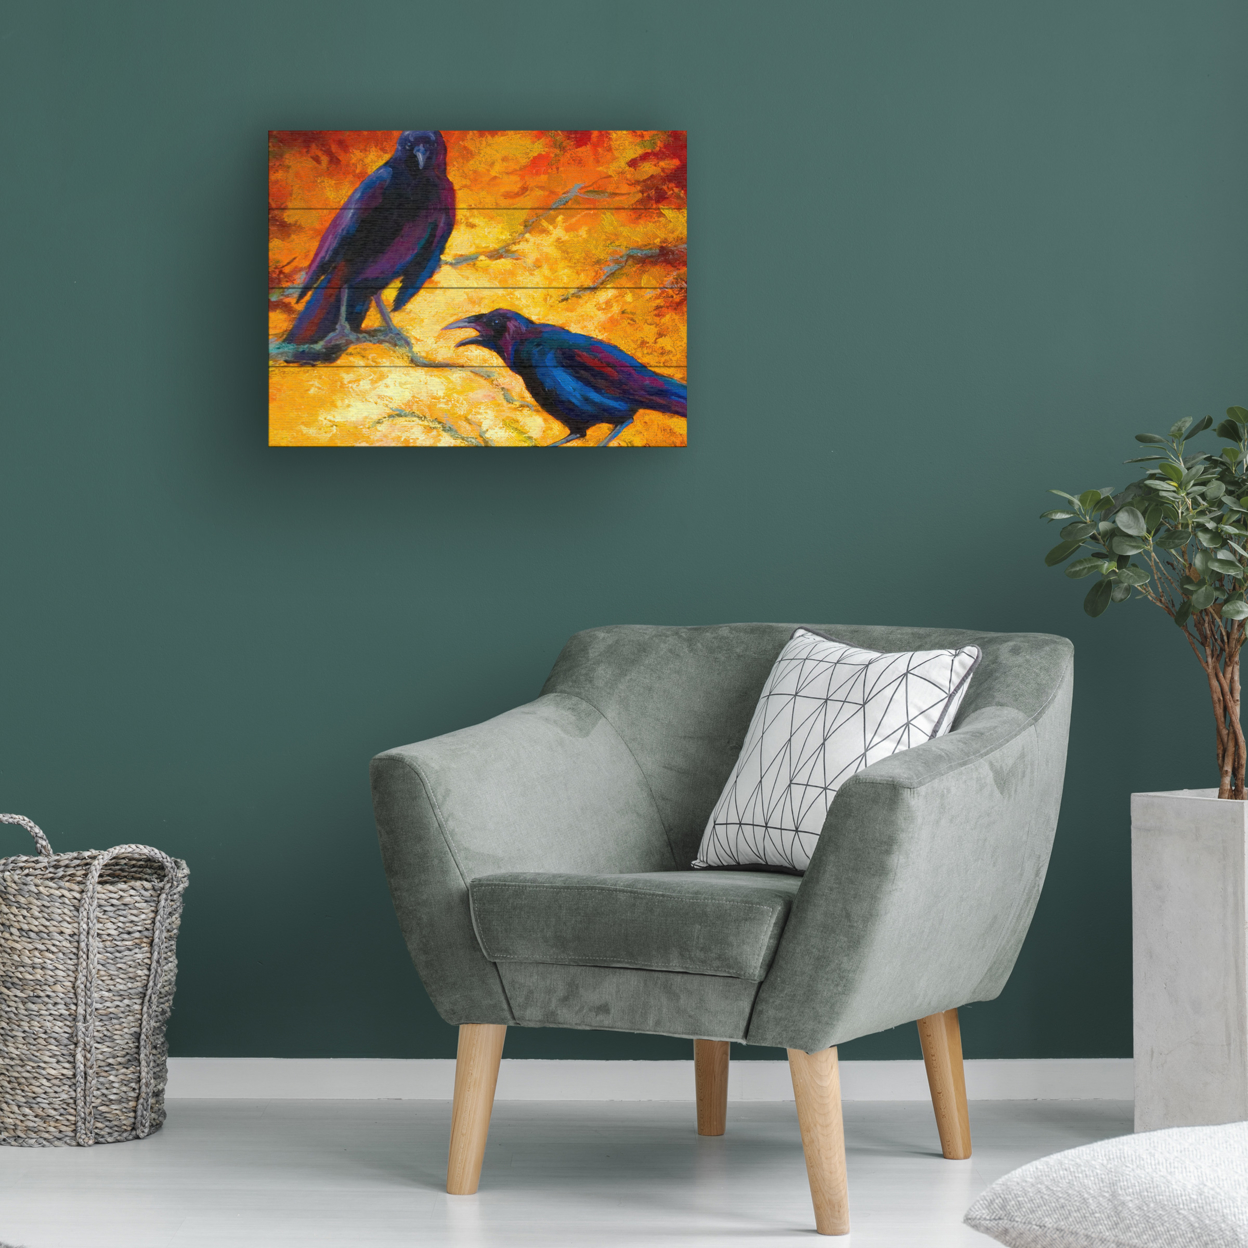 Wall Art 12 X 16 Inches Titled Crows 9 Ready To Hang Printed On Wooden Planks